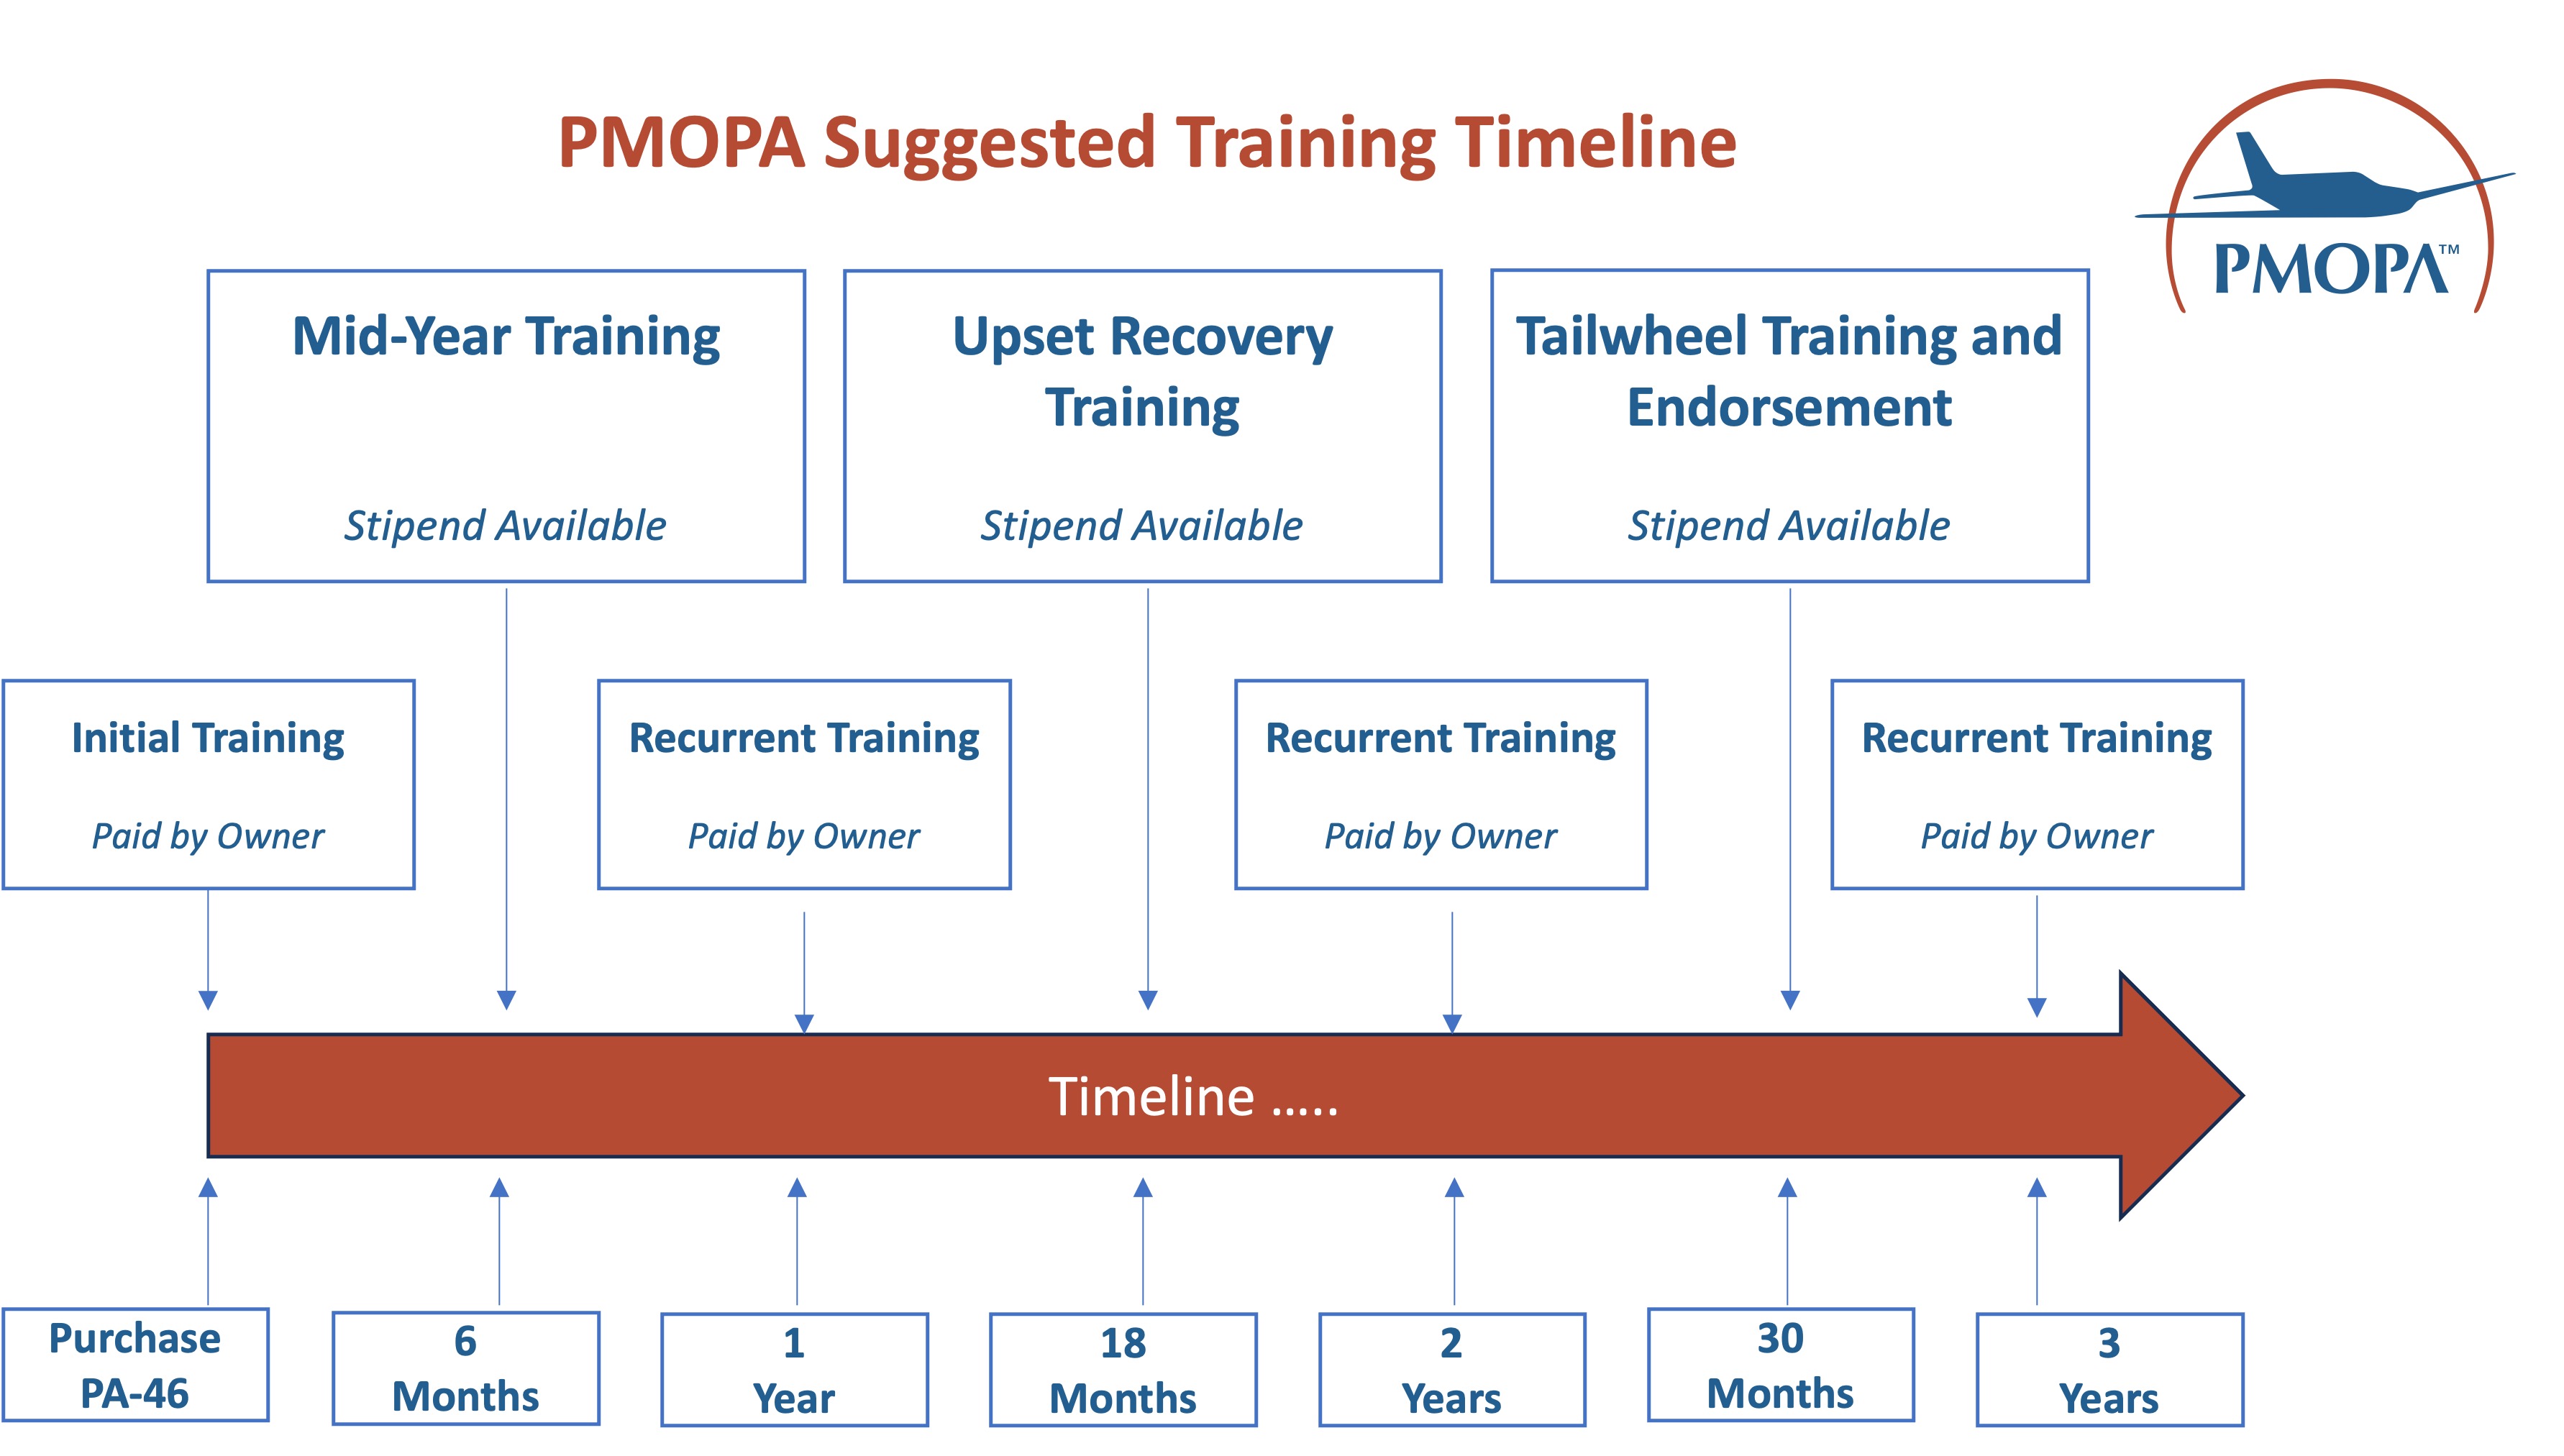 PMOPA Suggested Training Timeline